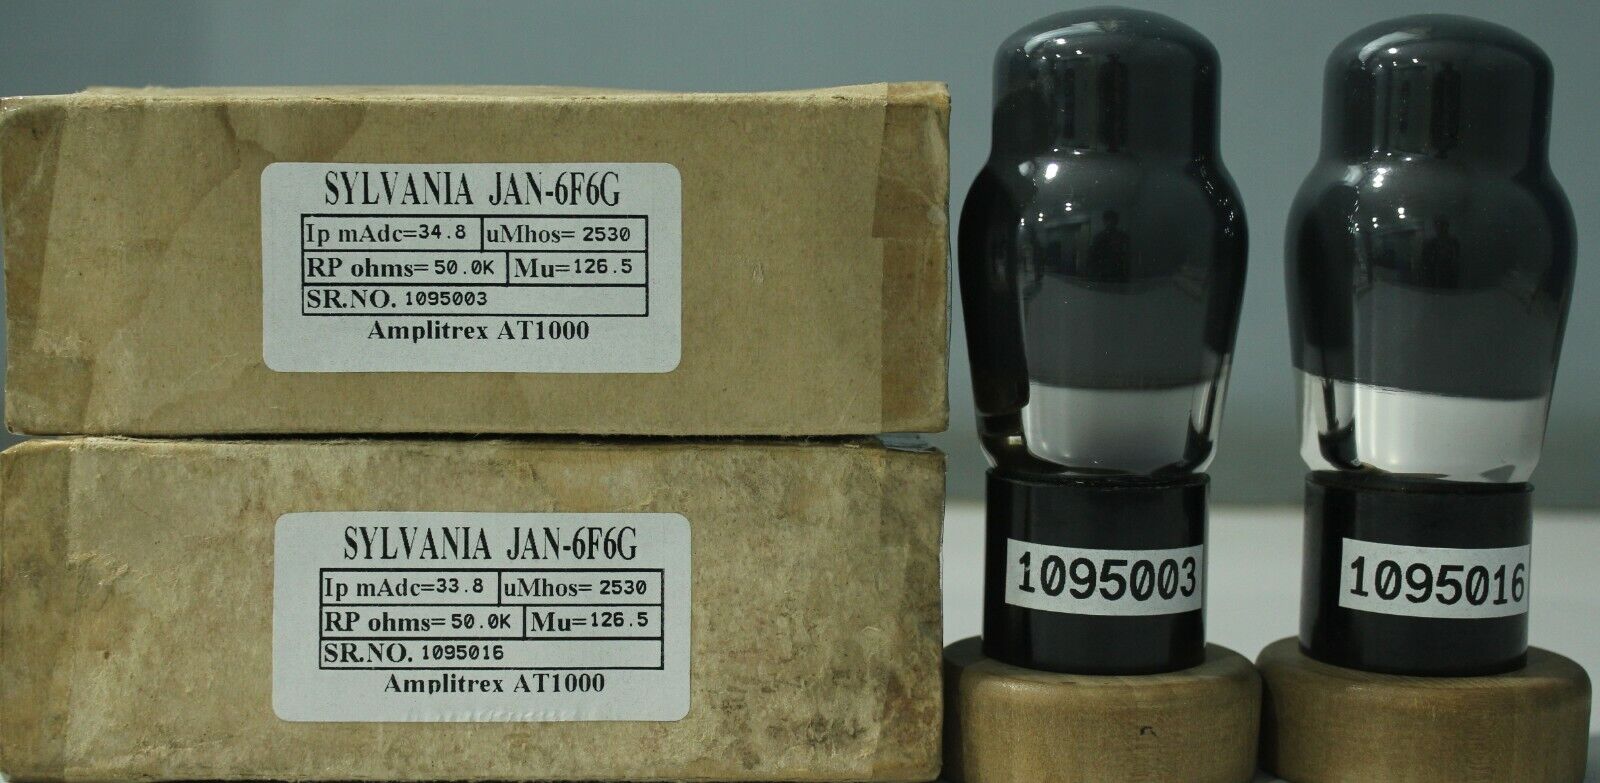 JAN-6F6G/VT66A Sylvania NOS NIB Made in U.S.A Amplitrex tested 1MP #1095003/16